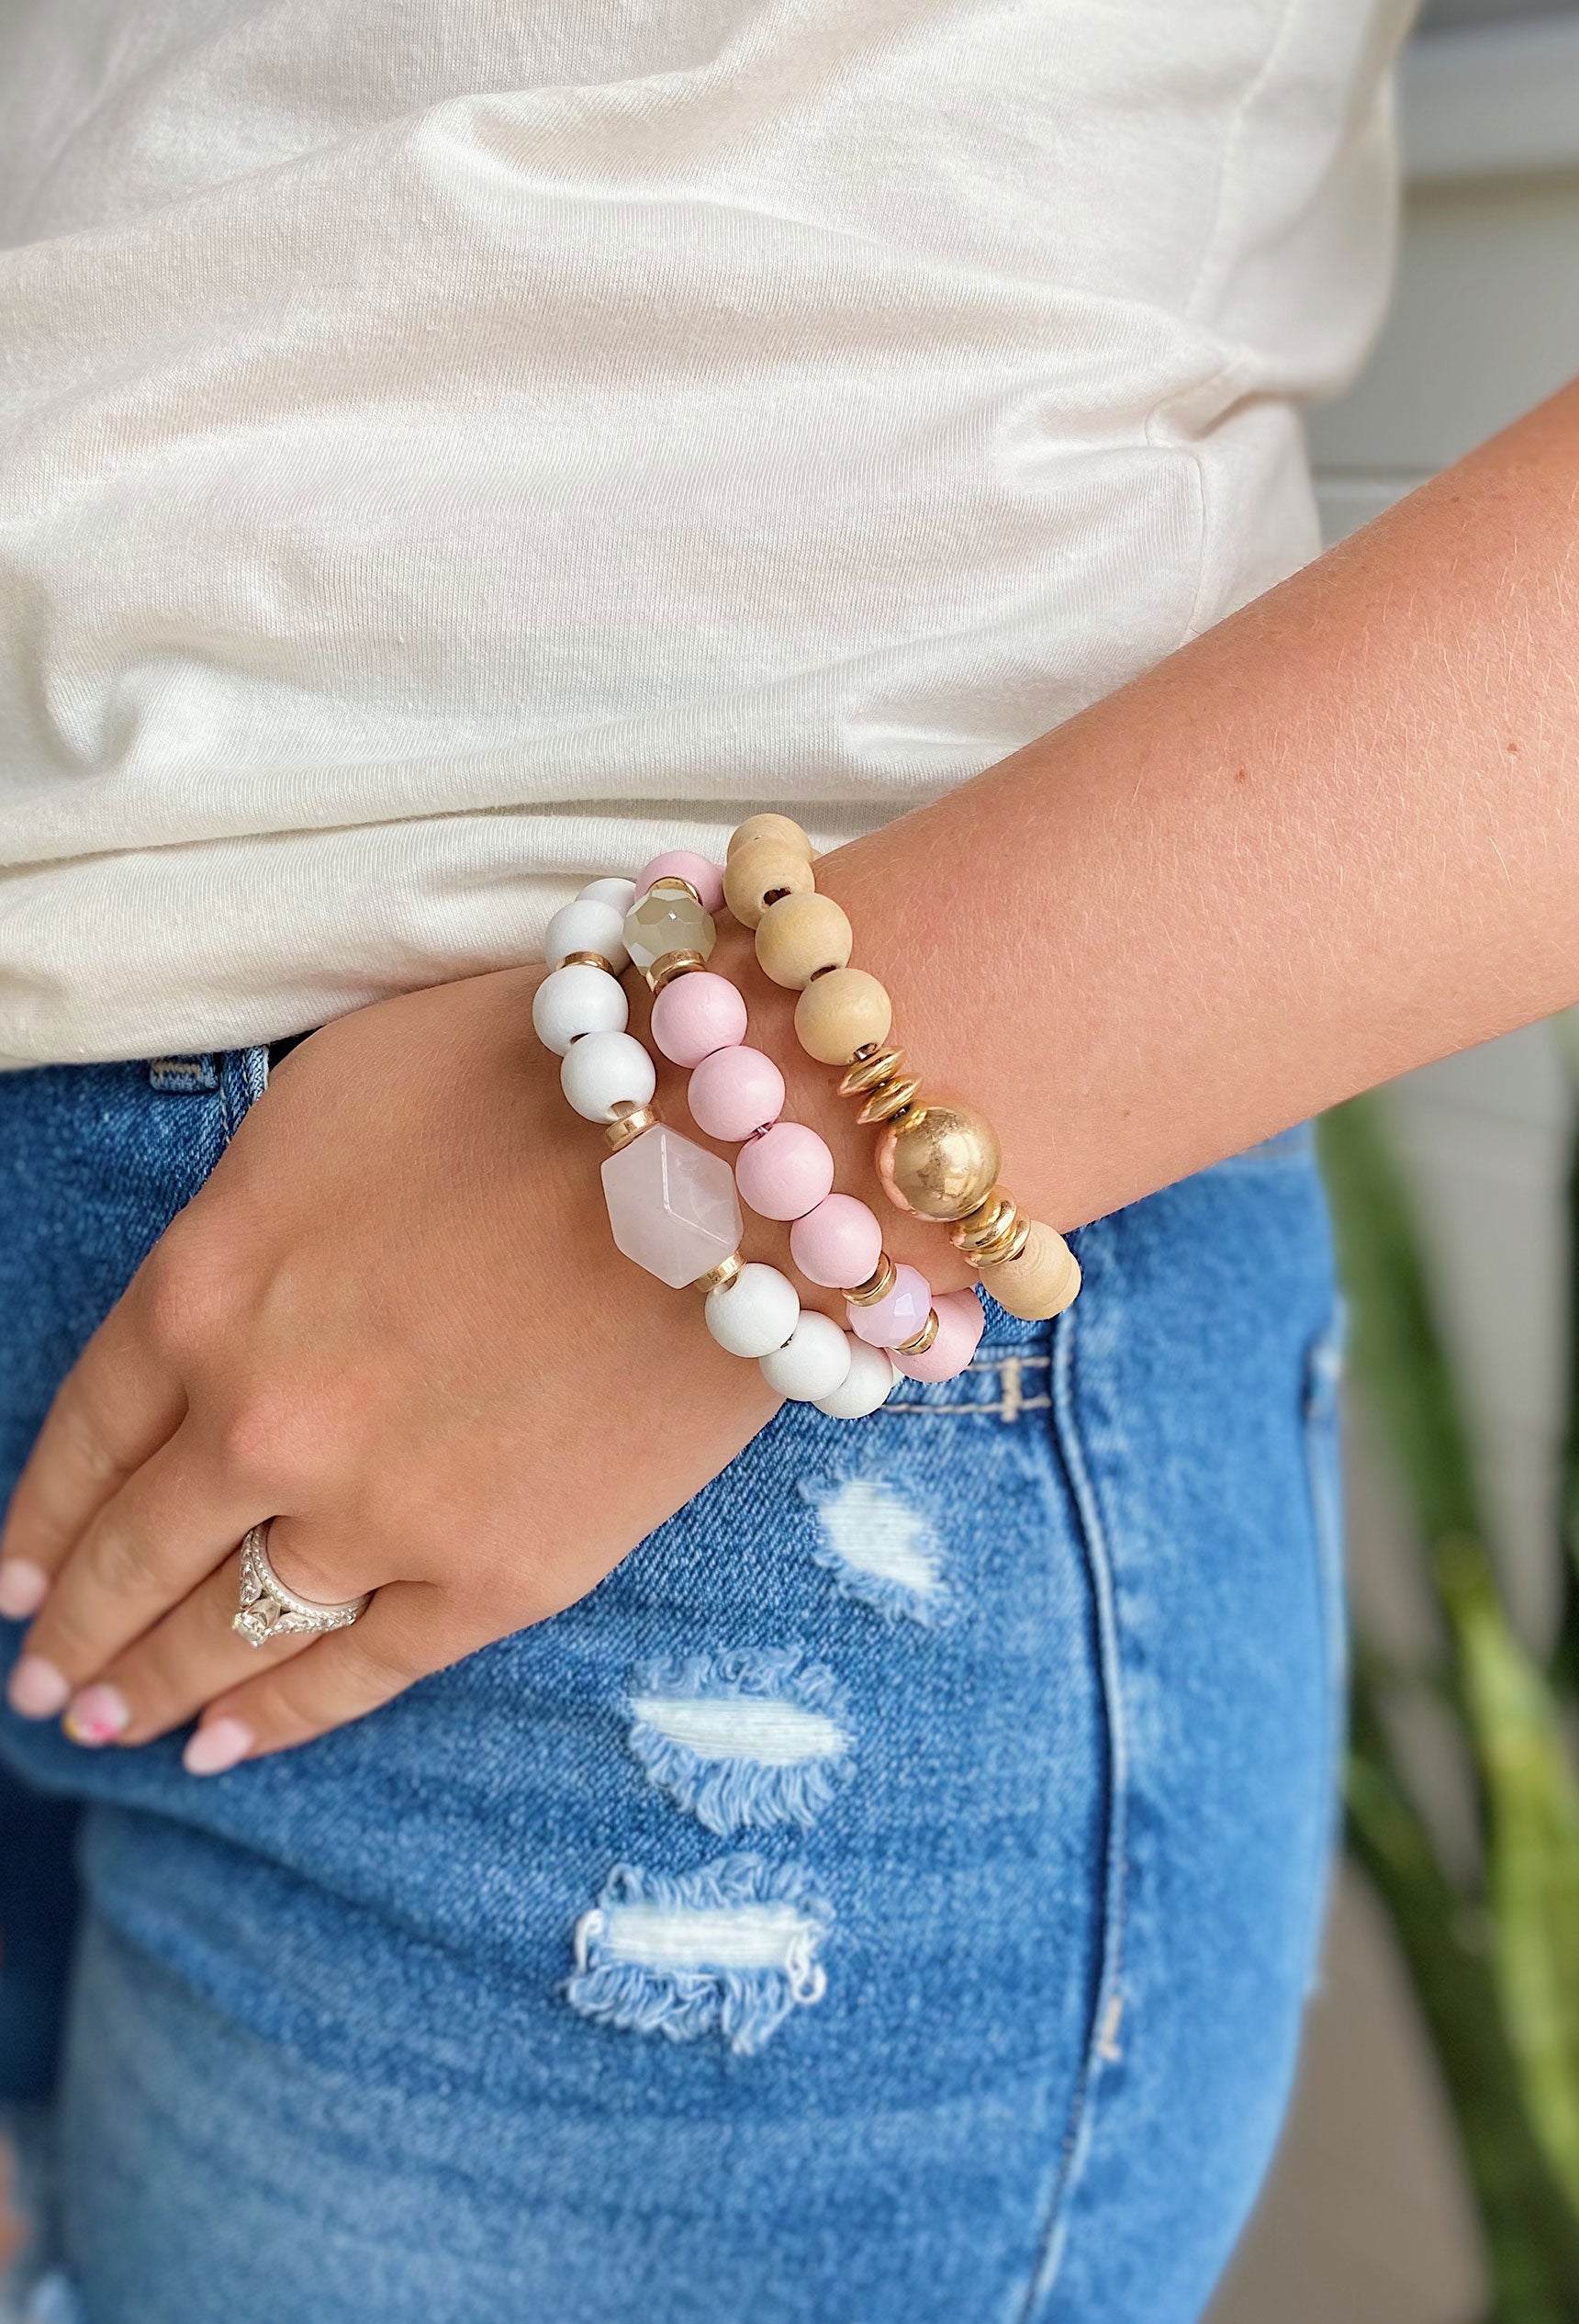 Good Days Ahead Bracelet Set, A set of white, pink, and tan wooden beaded bracelets with gold accent beads featuring an iridescent stone detail